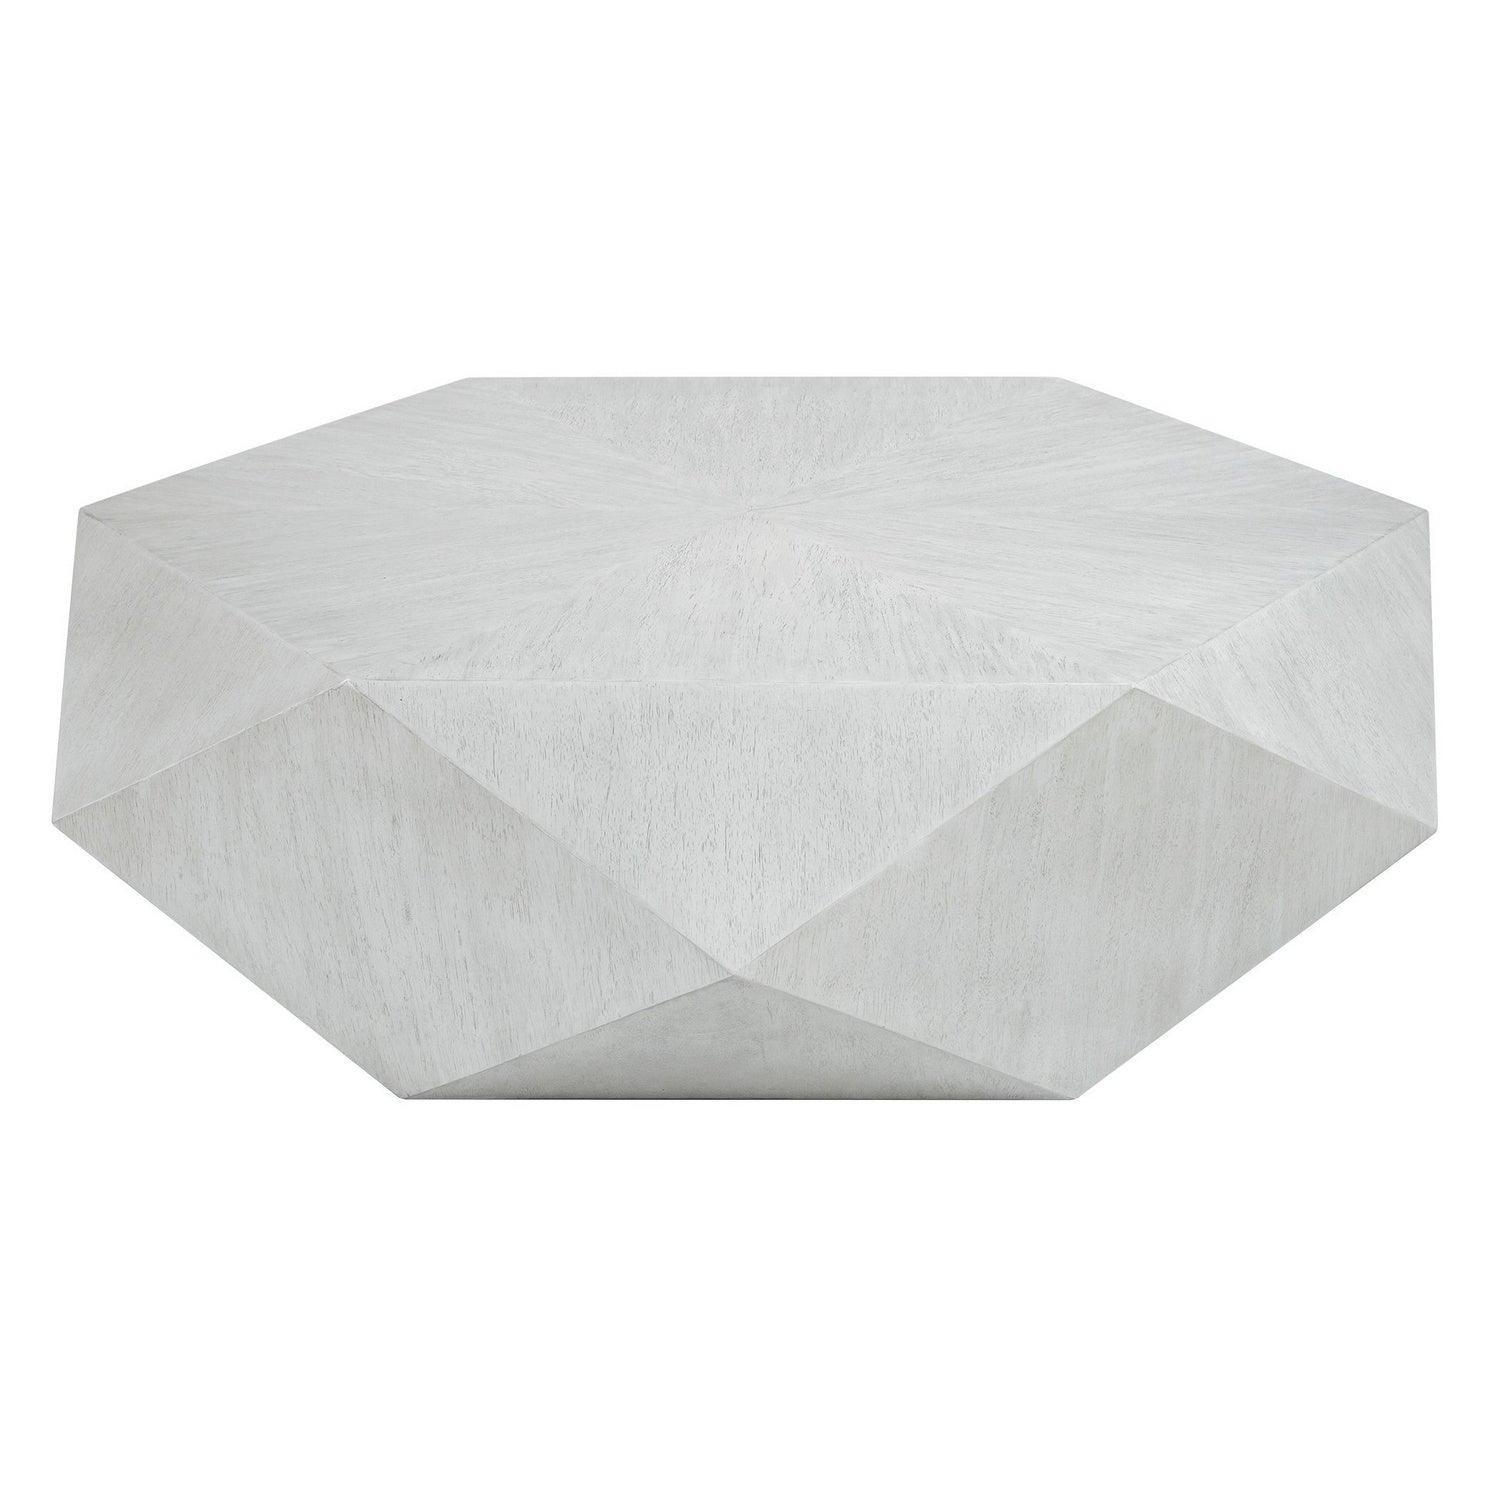 The Uttermost - Volker Coffee Table - 25163 | Montreal Lighting & Hardware